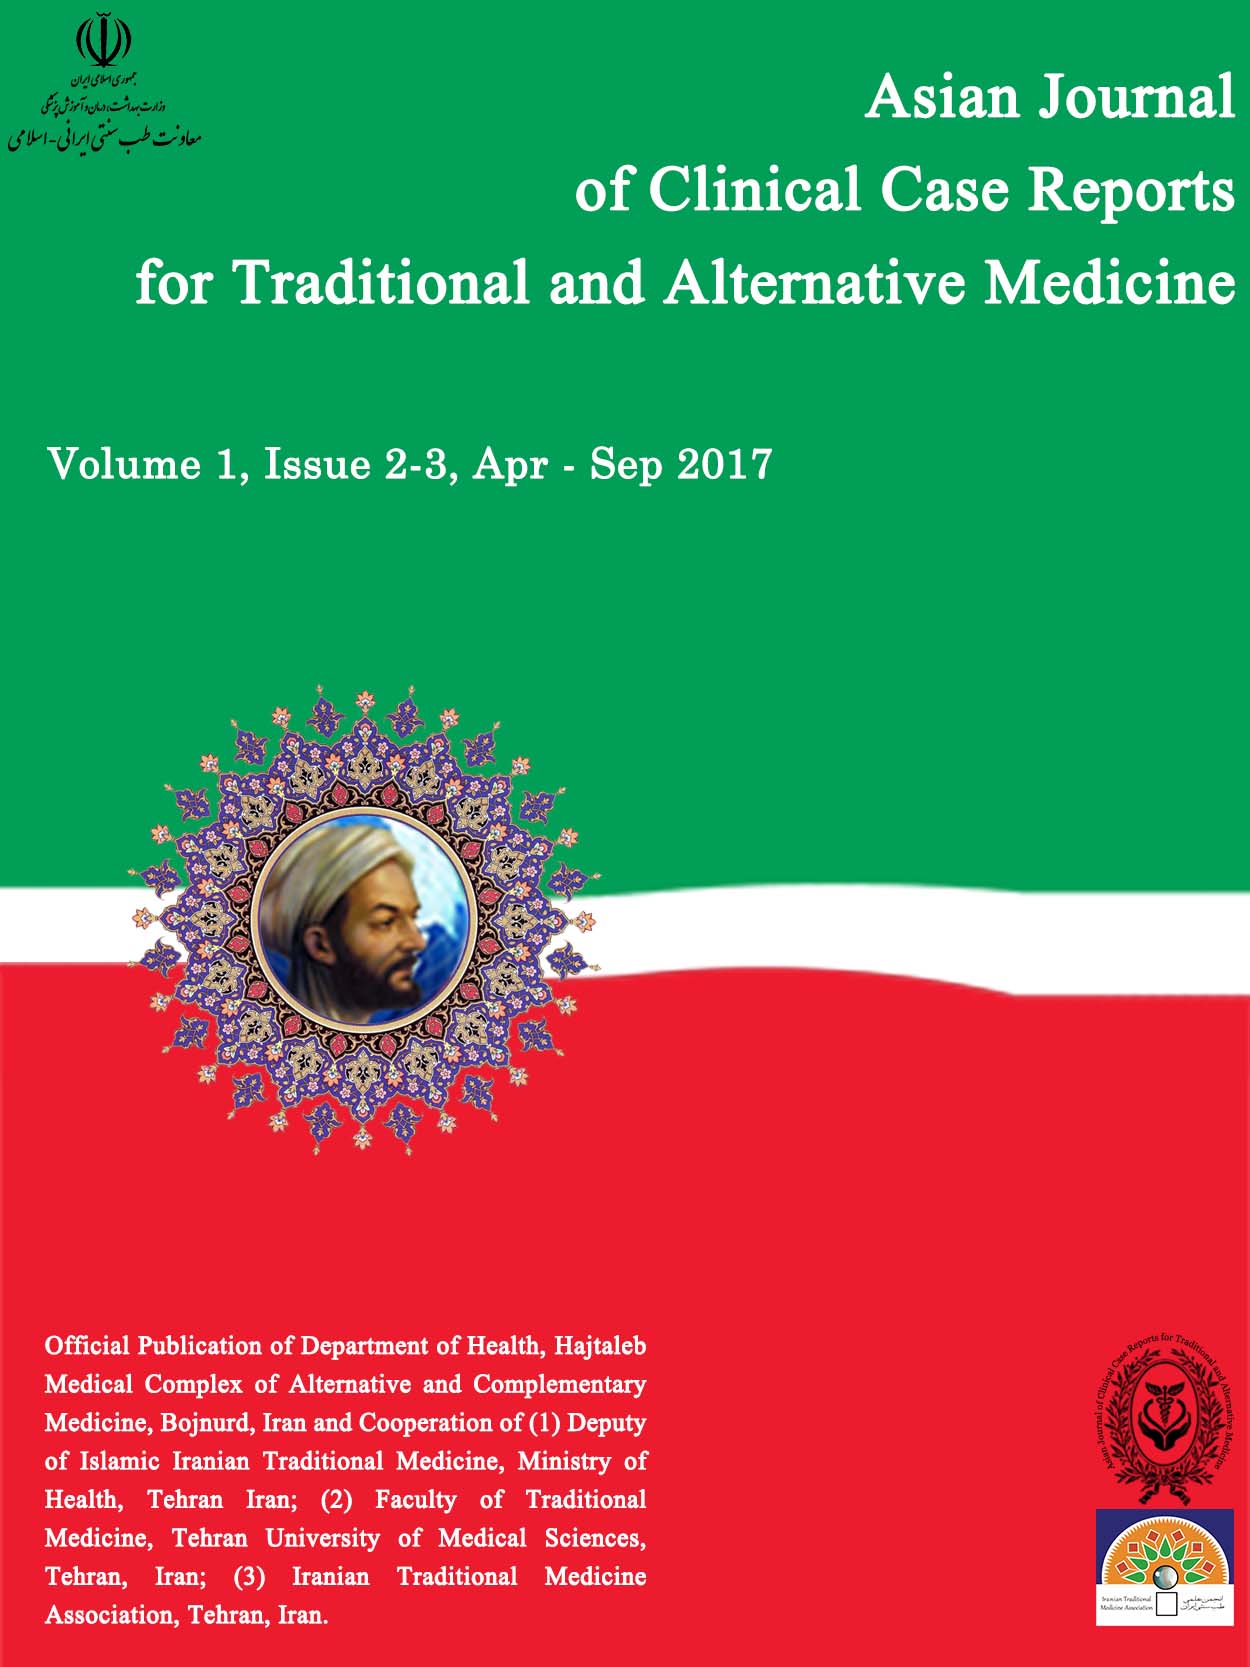 Asian Journal of Clinical Case Reports for Traditional and Alternative Medicine